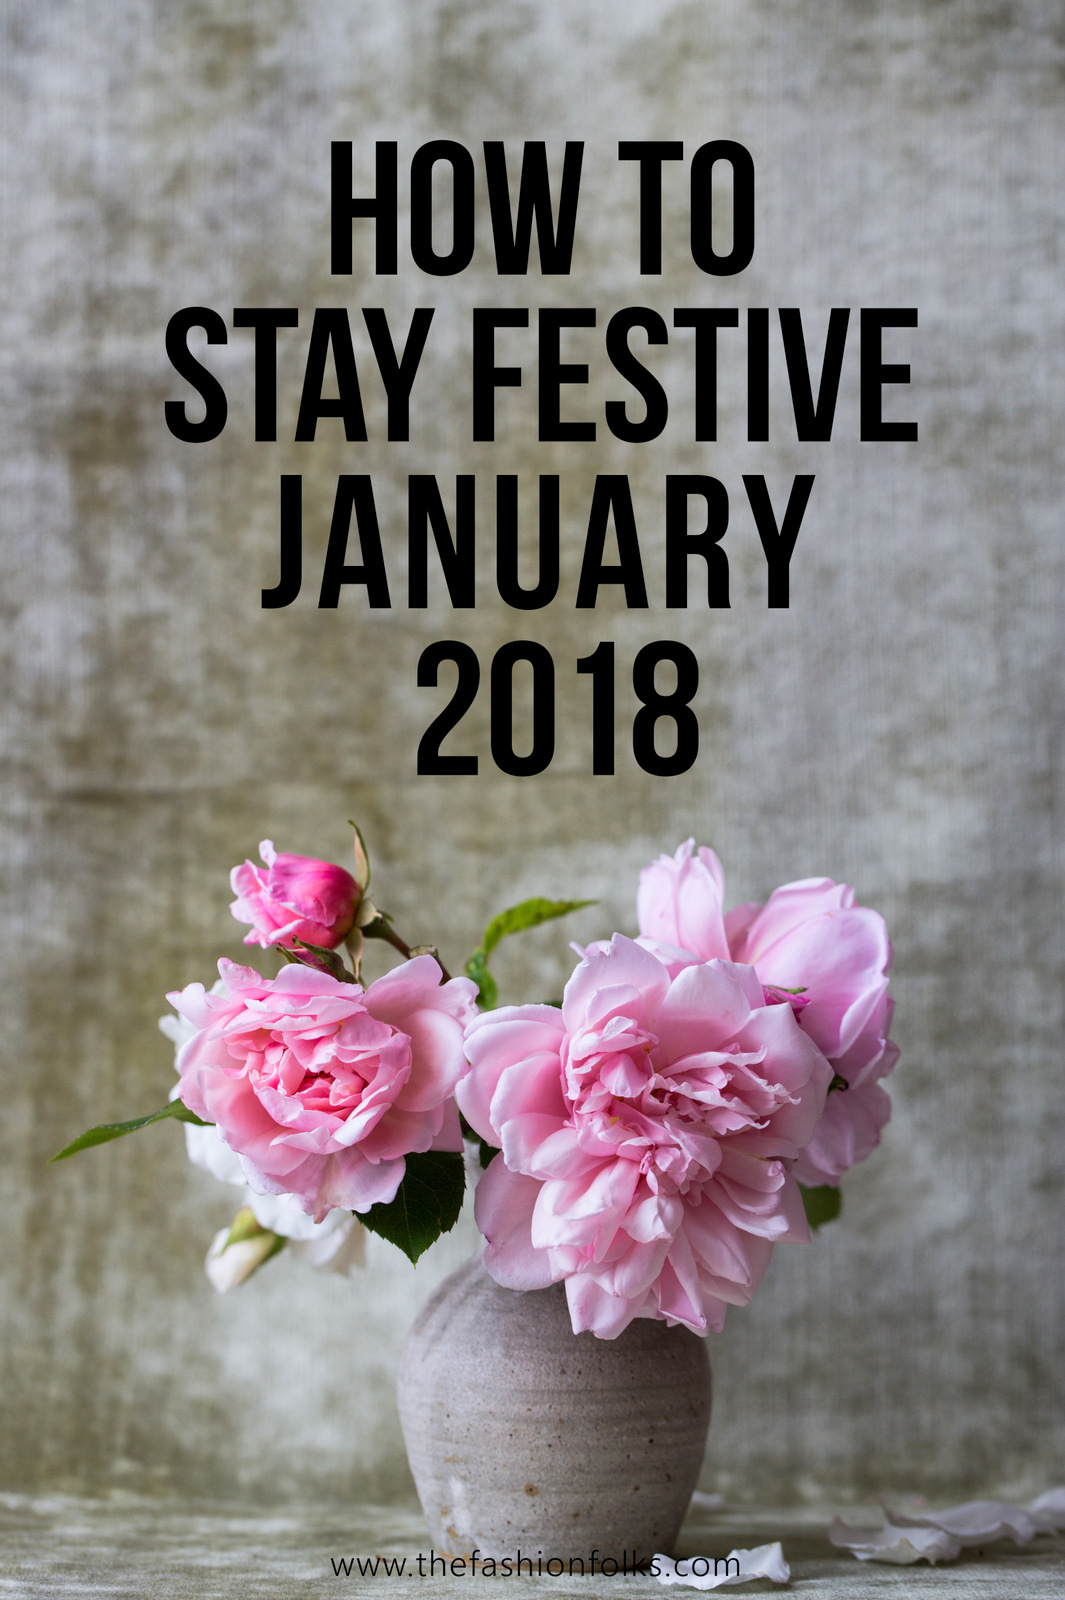 How To Stay Festive January 2018